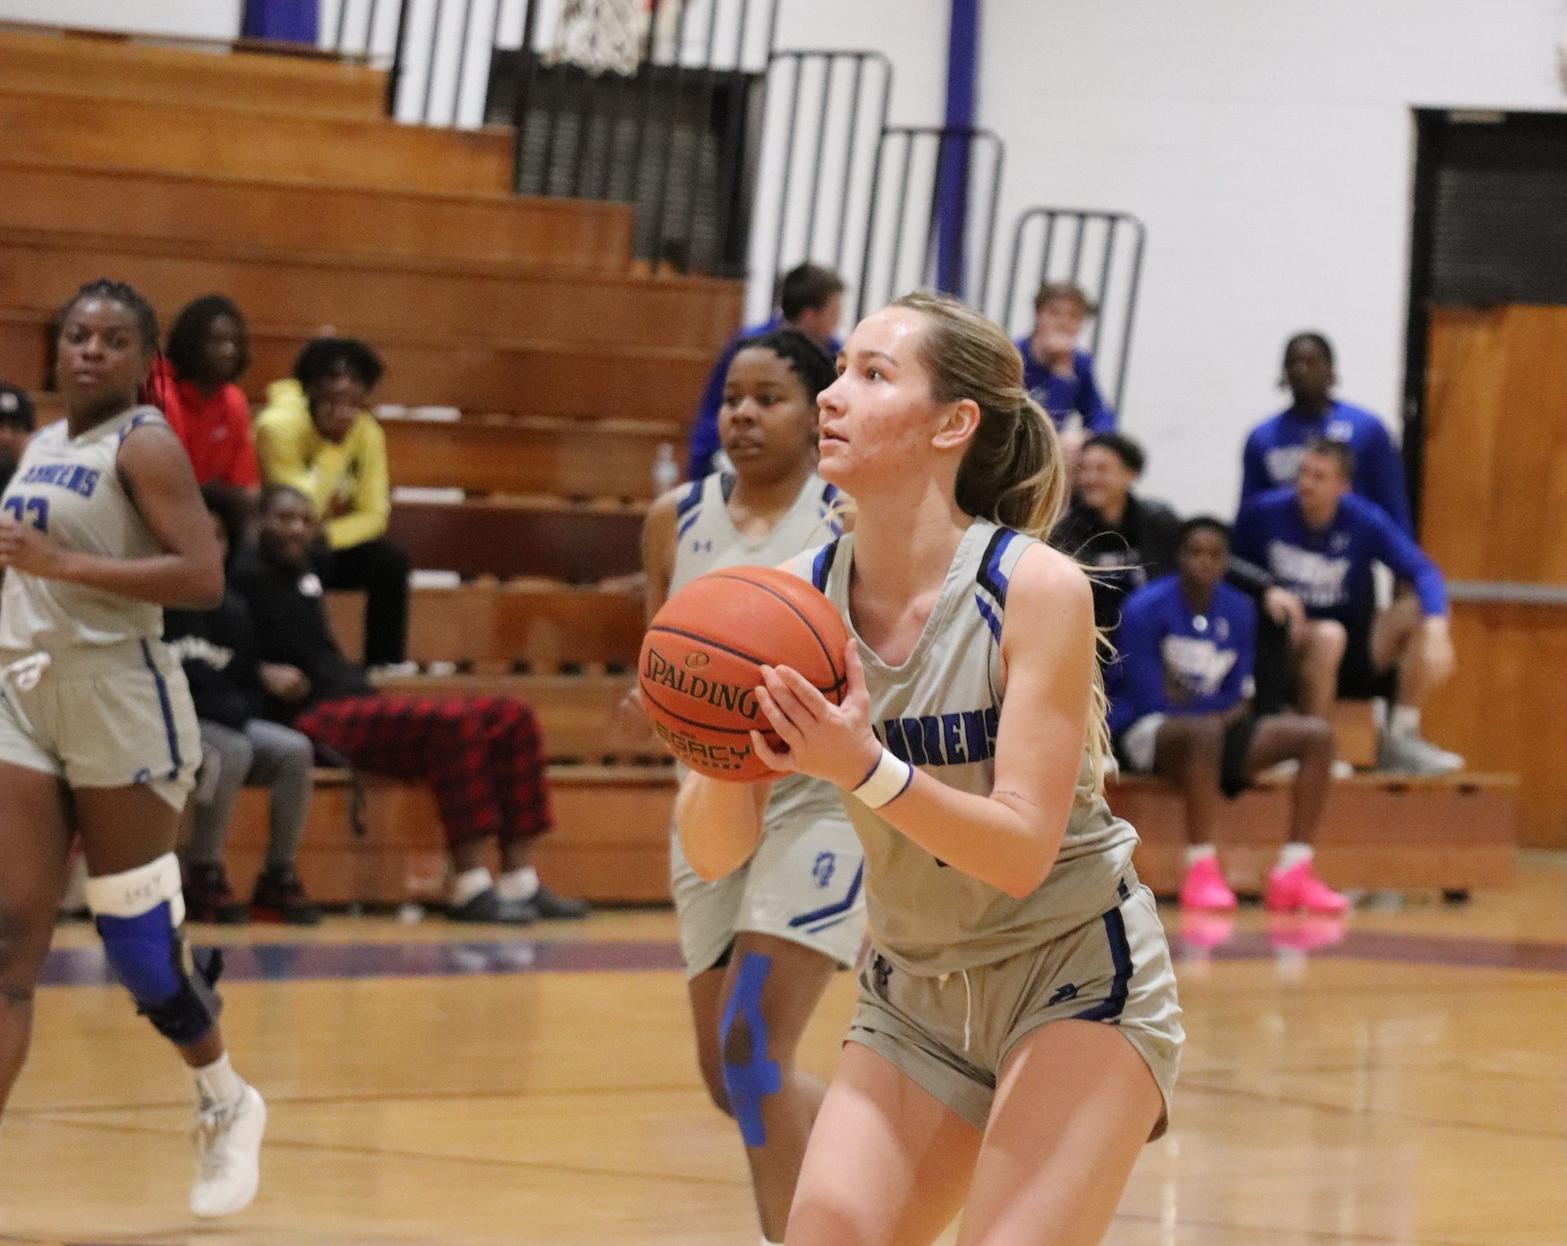 Women's basketball records second win in a row with win over Tennessee Wesleyan